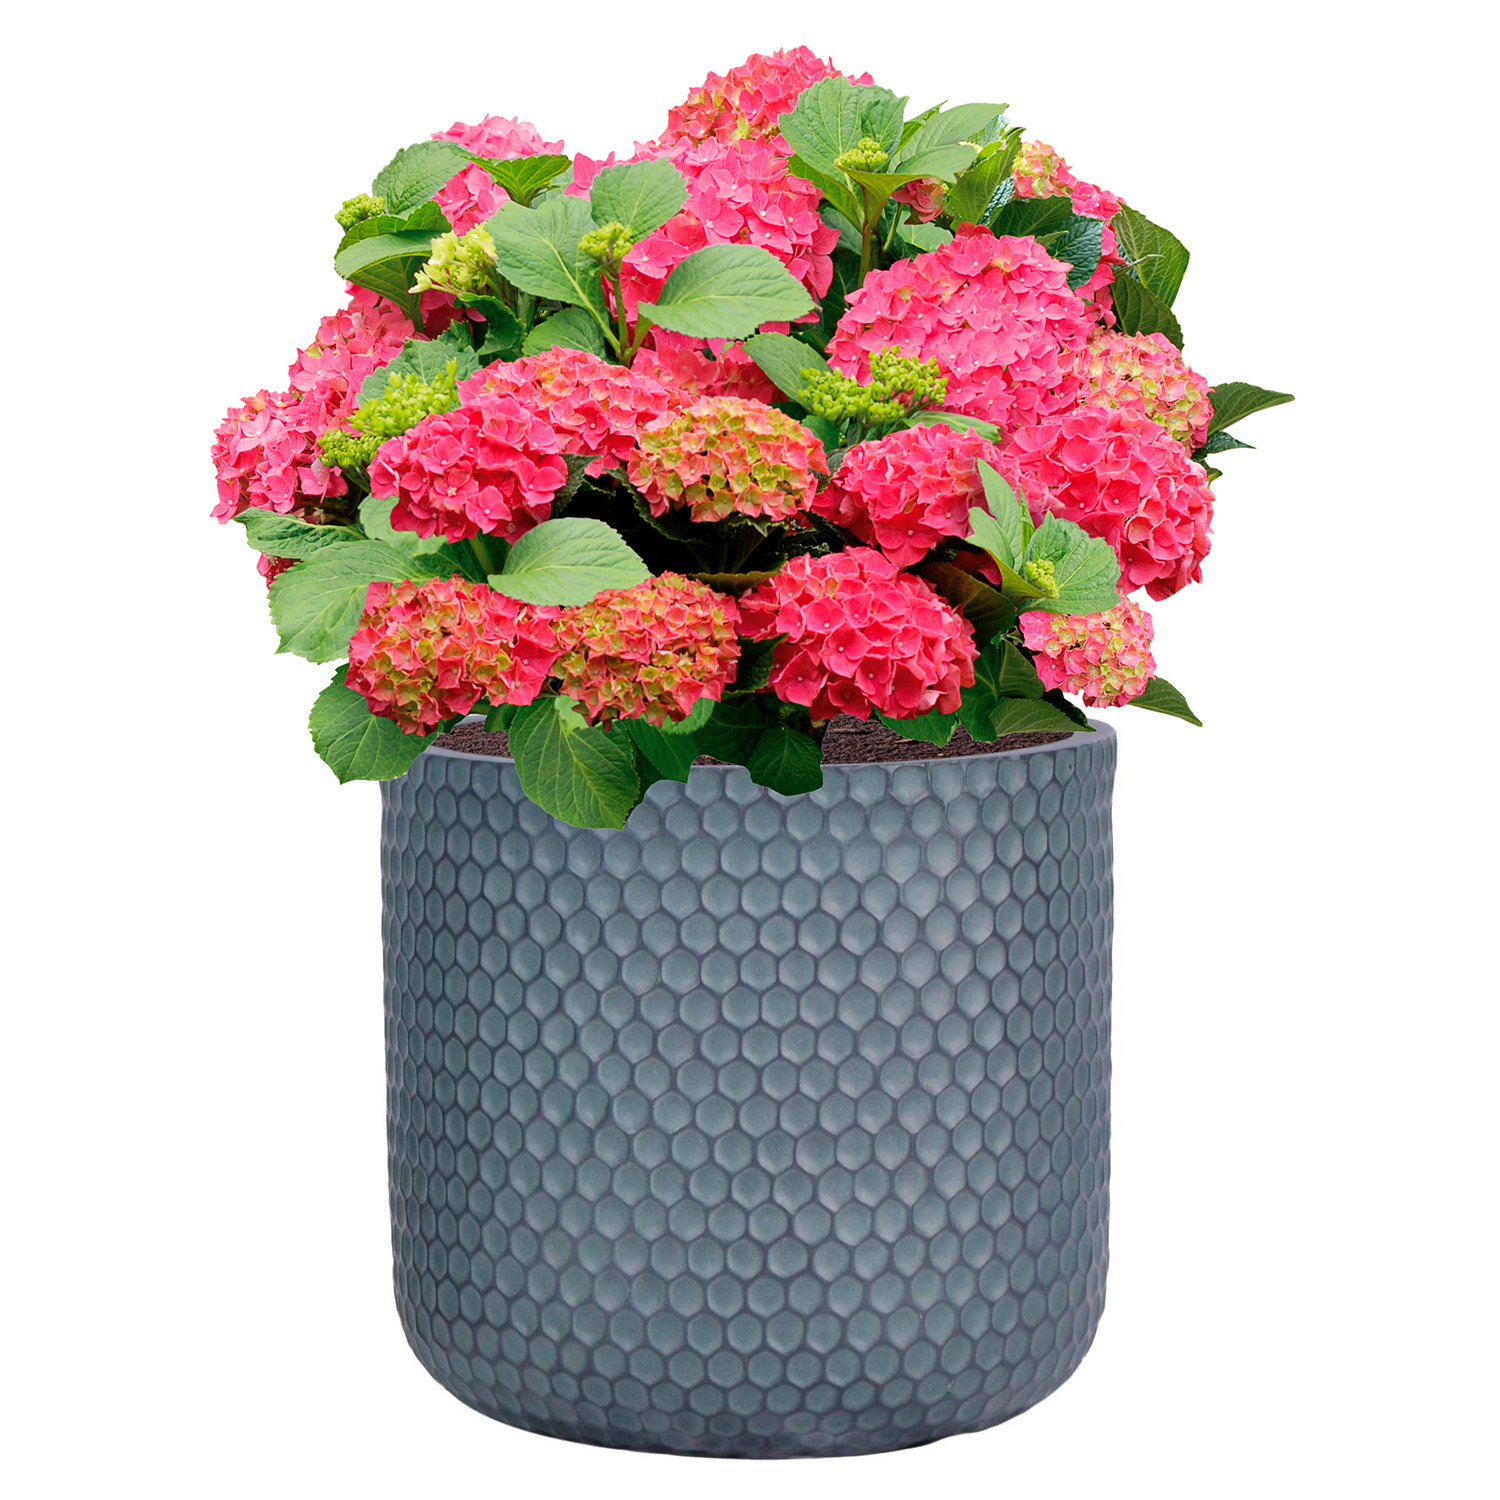 Honeycomb Style Slate Grey Cylinder Round Outdoor Planter D31 H30.5 cm, 23 ltrs Cap.